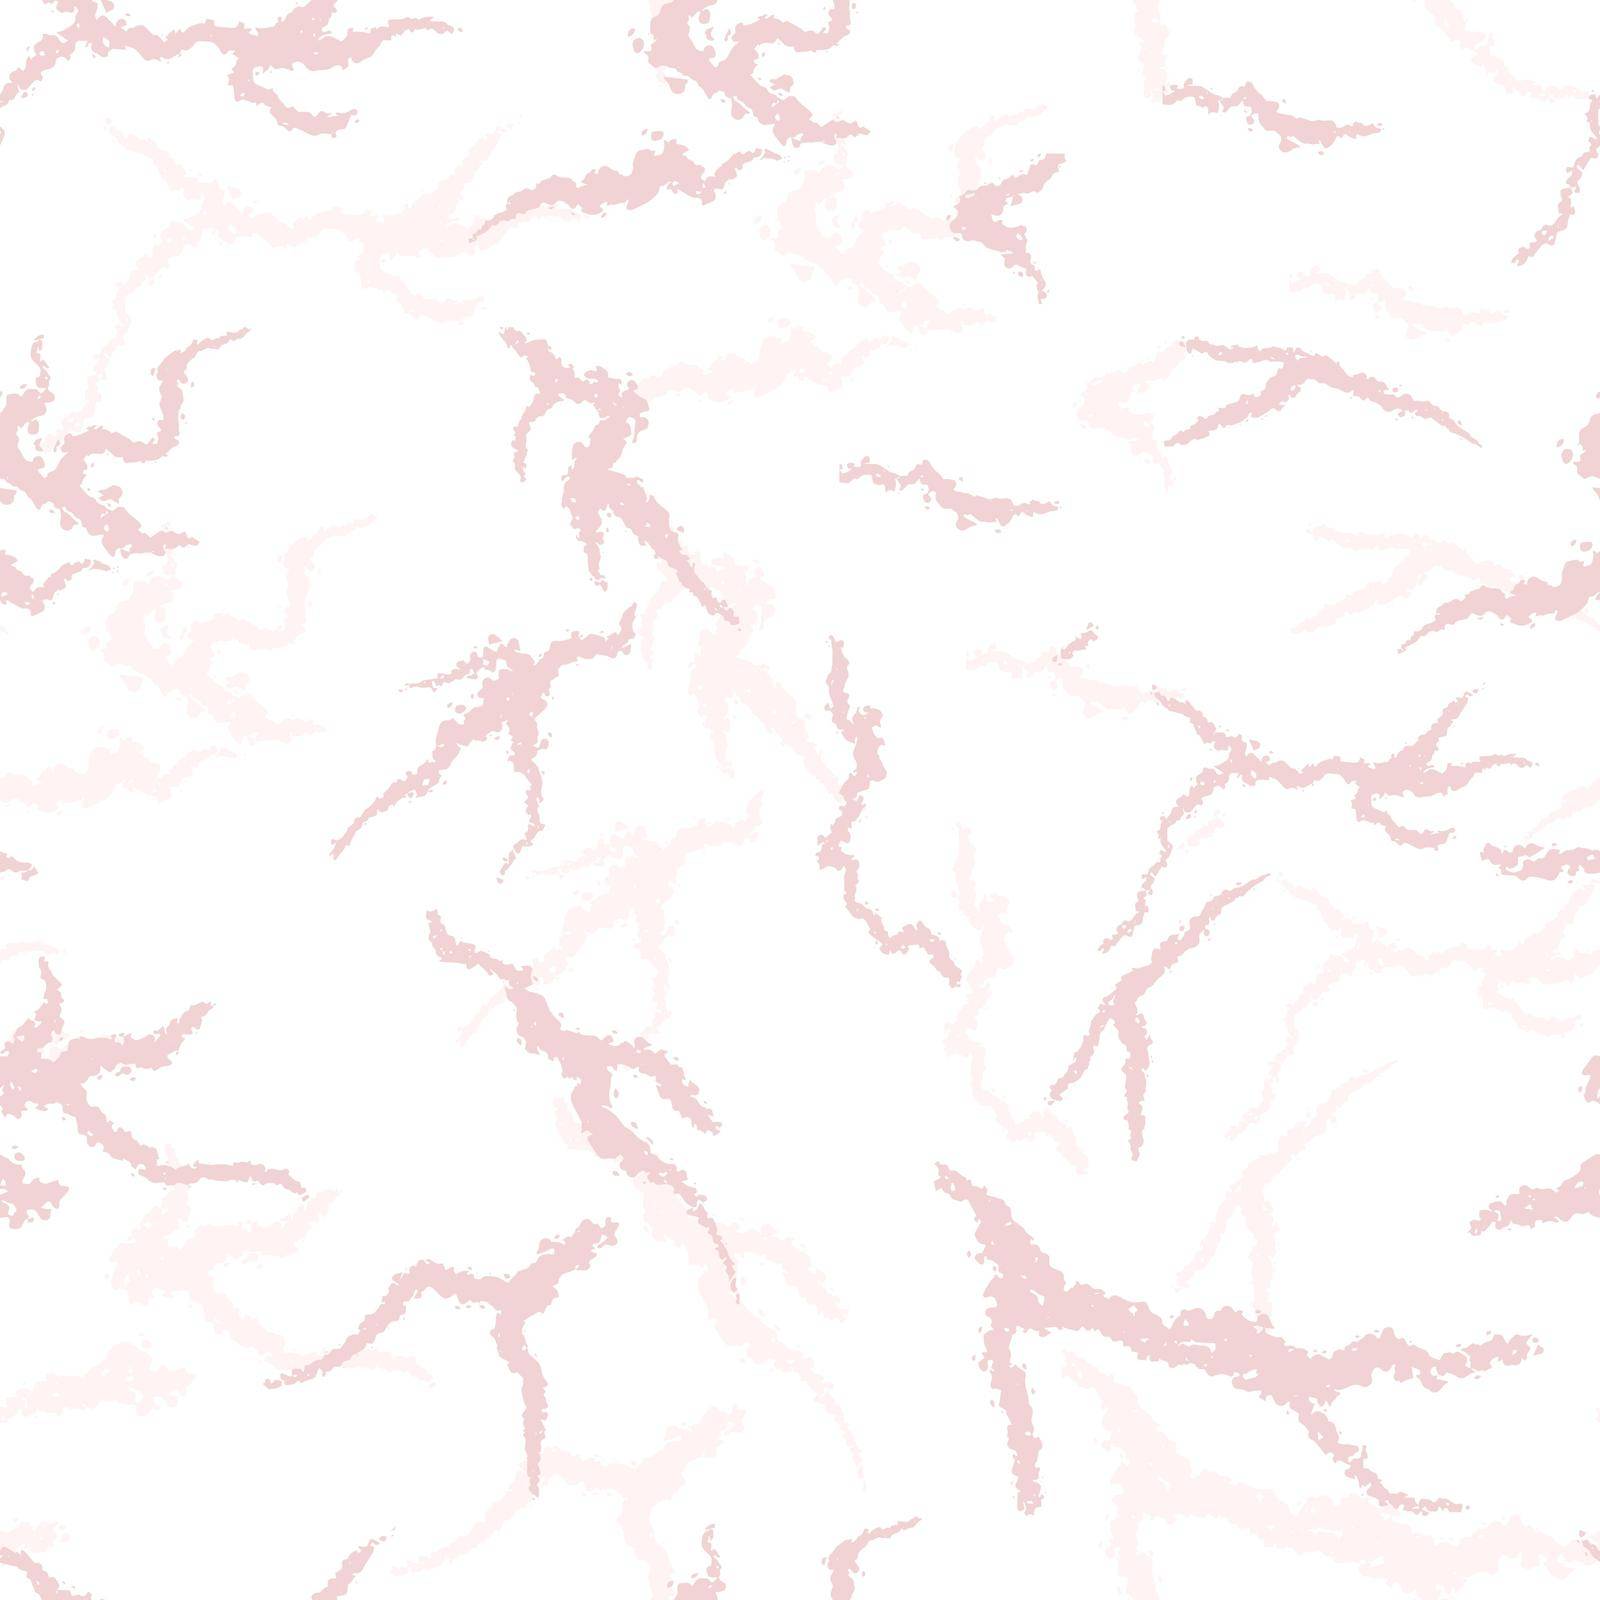 Pink marble texture seamless pattern. Background marble stone with pink veins and splashes. Print for paper, wallpaper, design. Solid wall fill